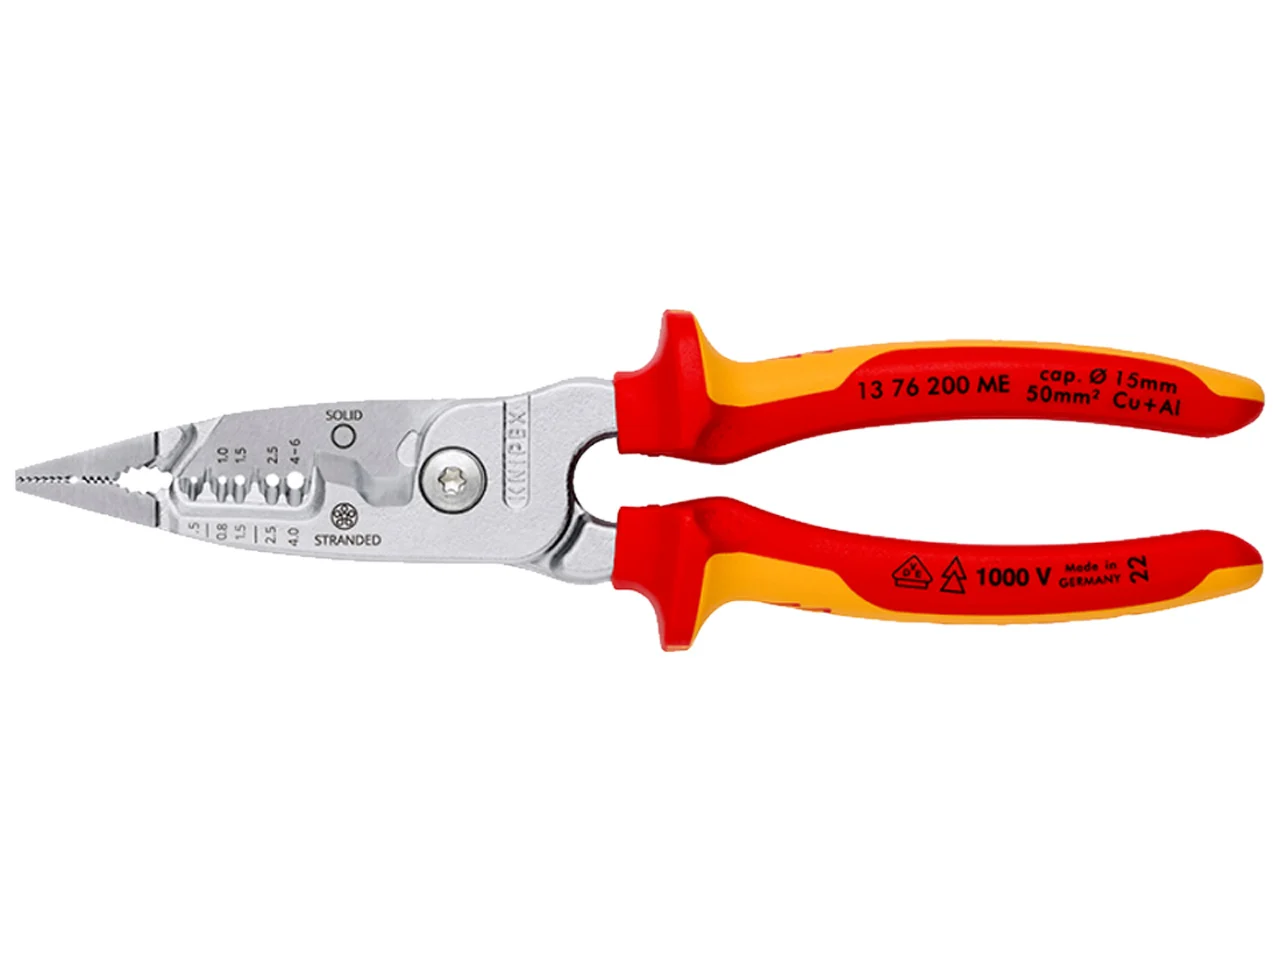 Knipex 13 86 200 Pliers for Electrical Installation VDE-tested 